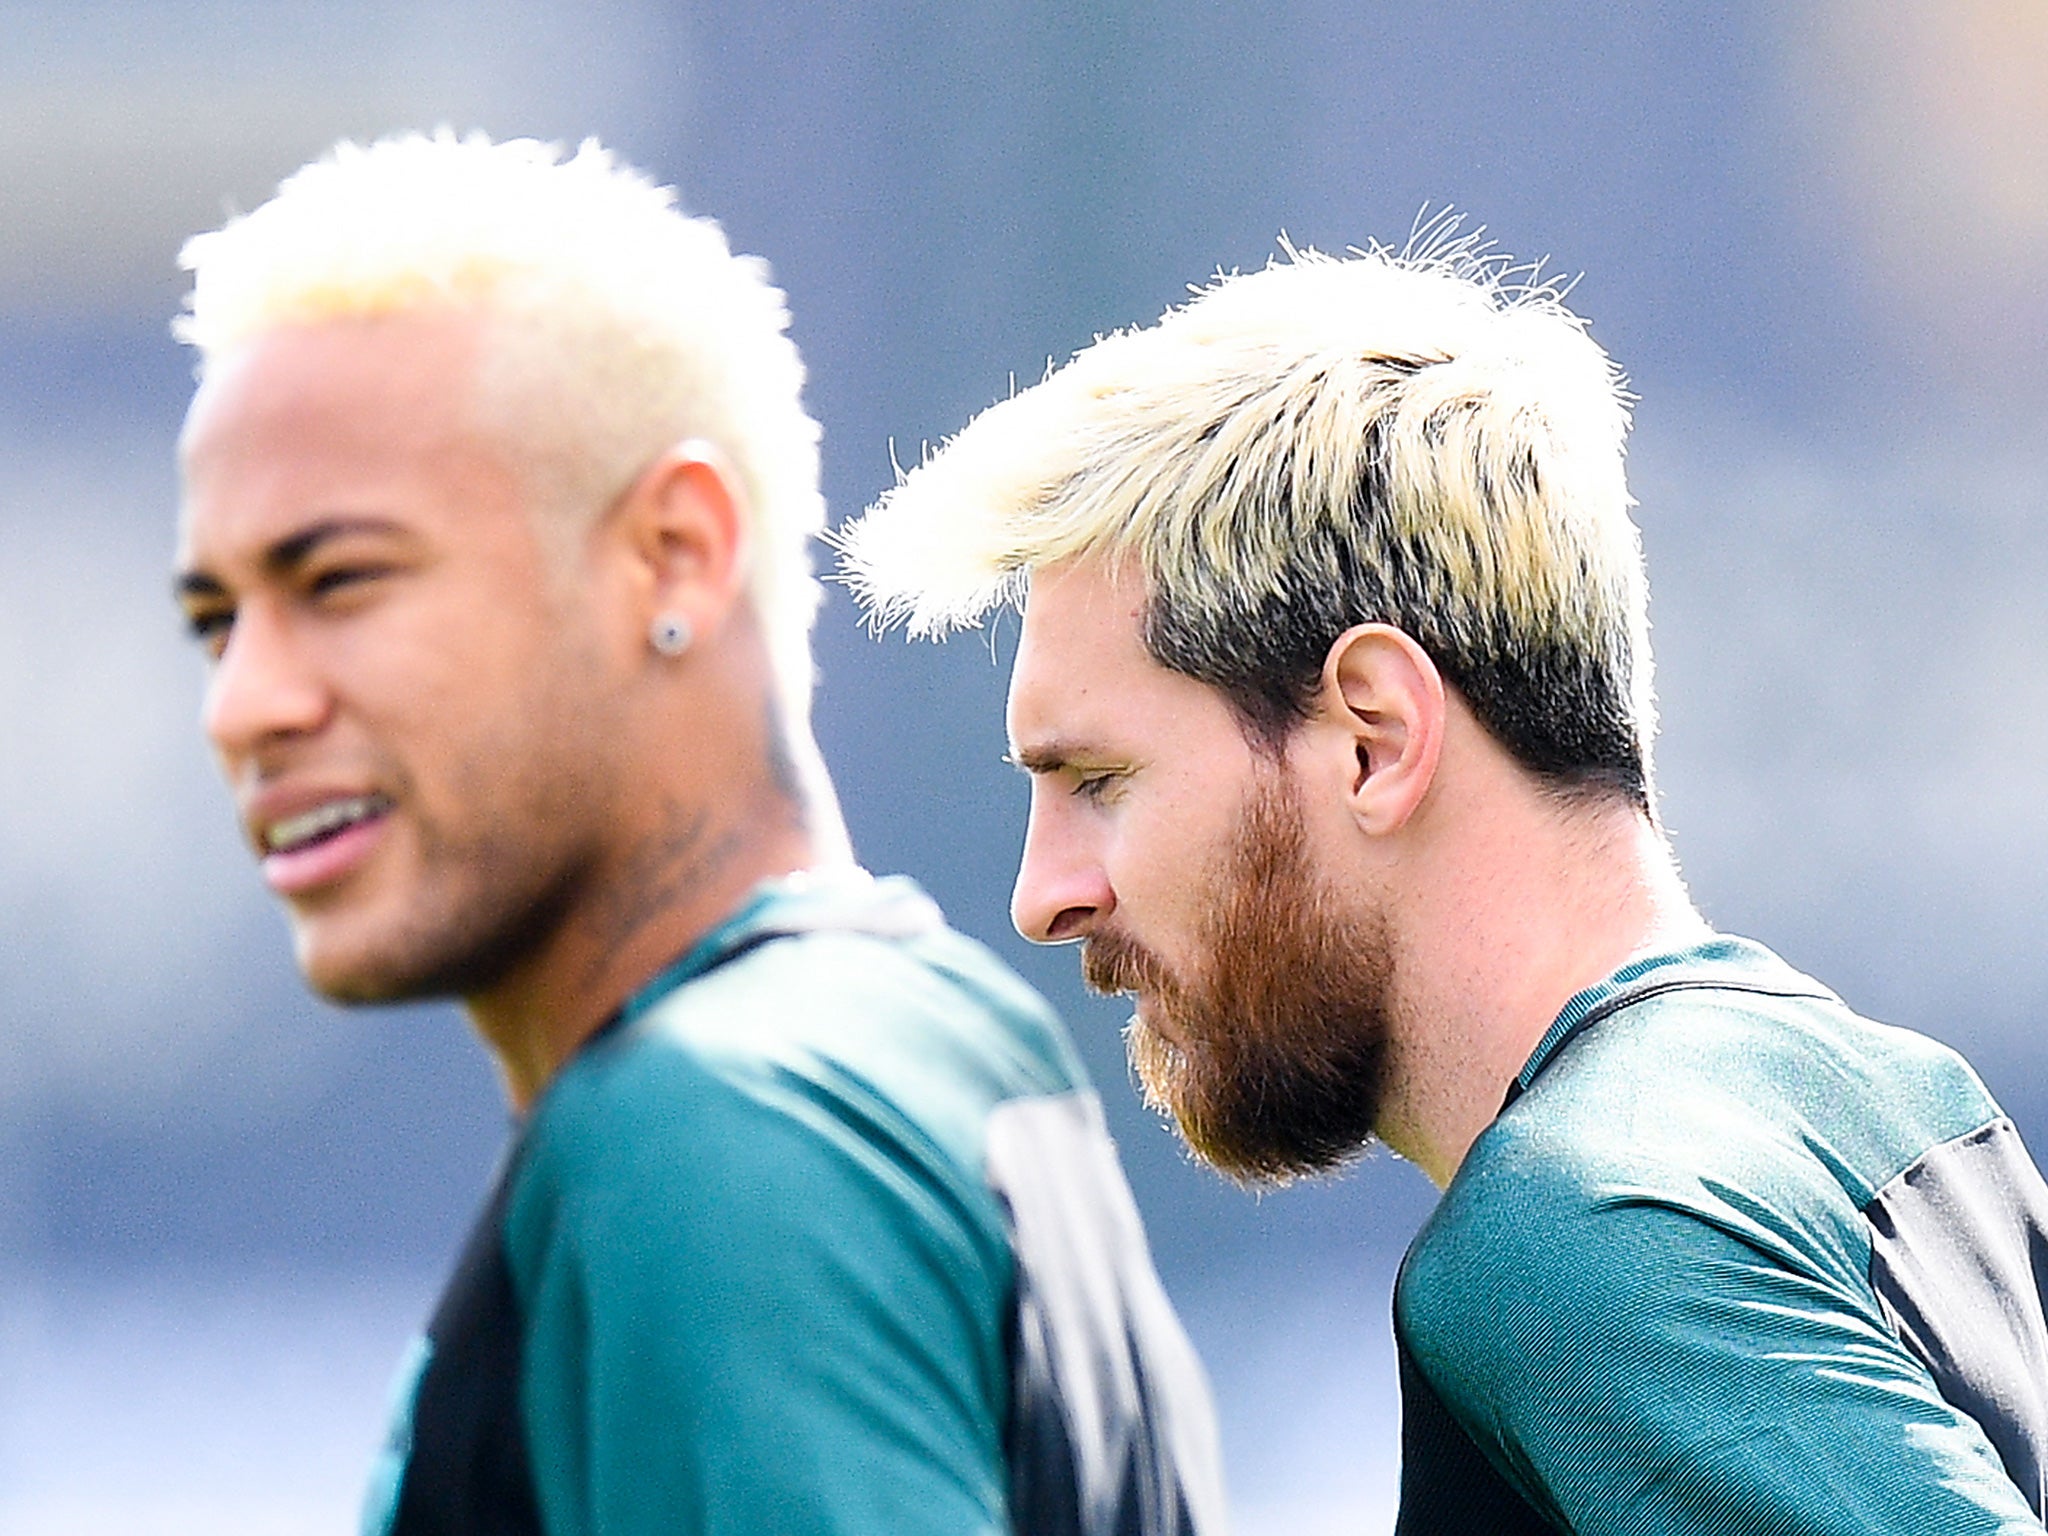 Neymar and Messi in training with Barcelona